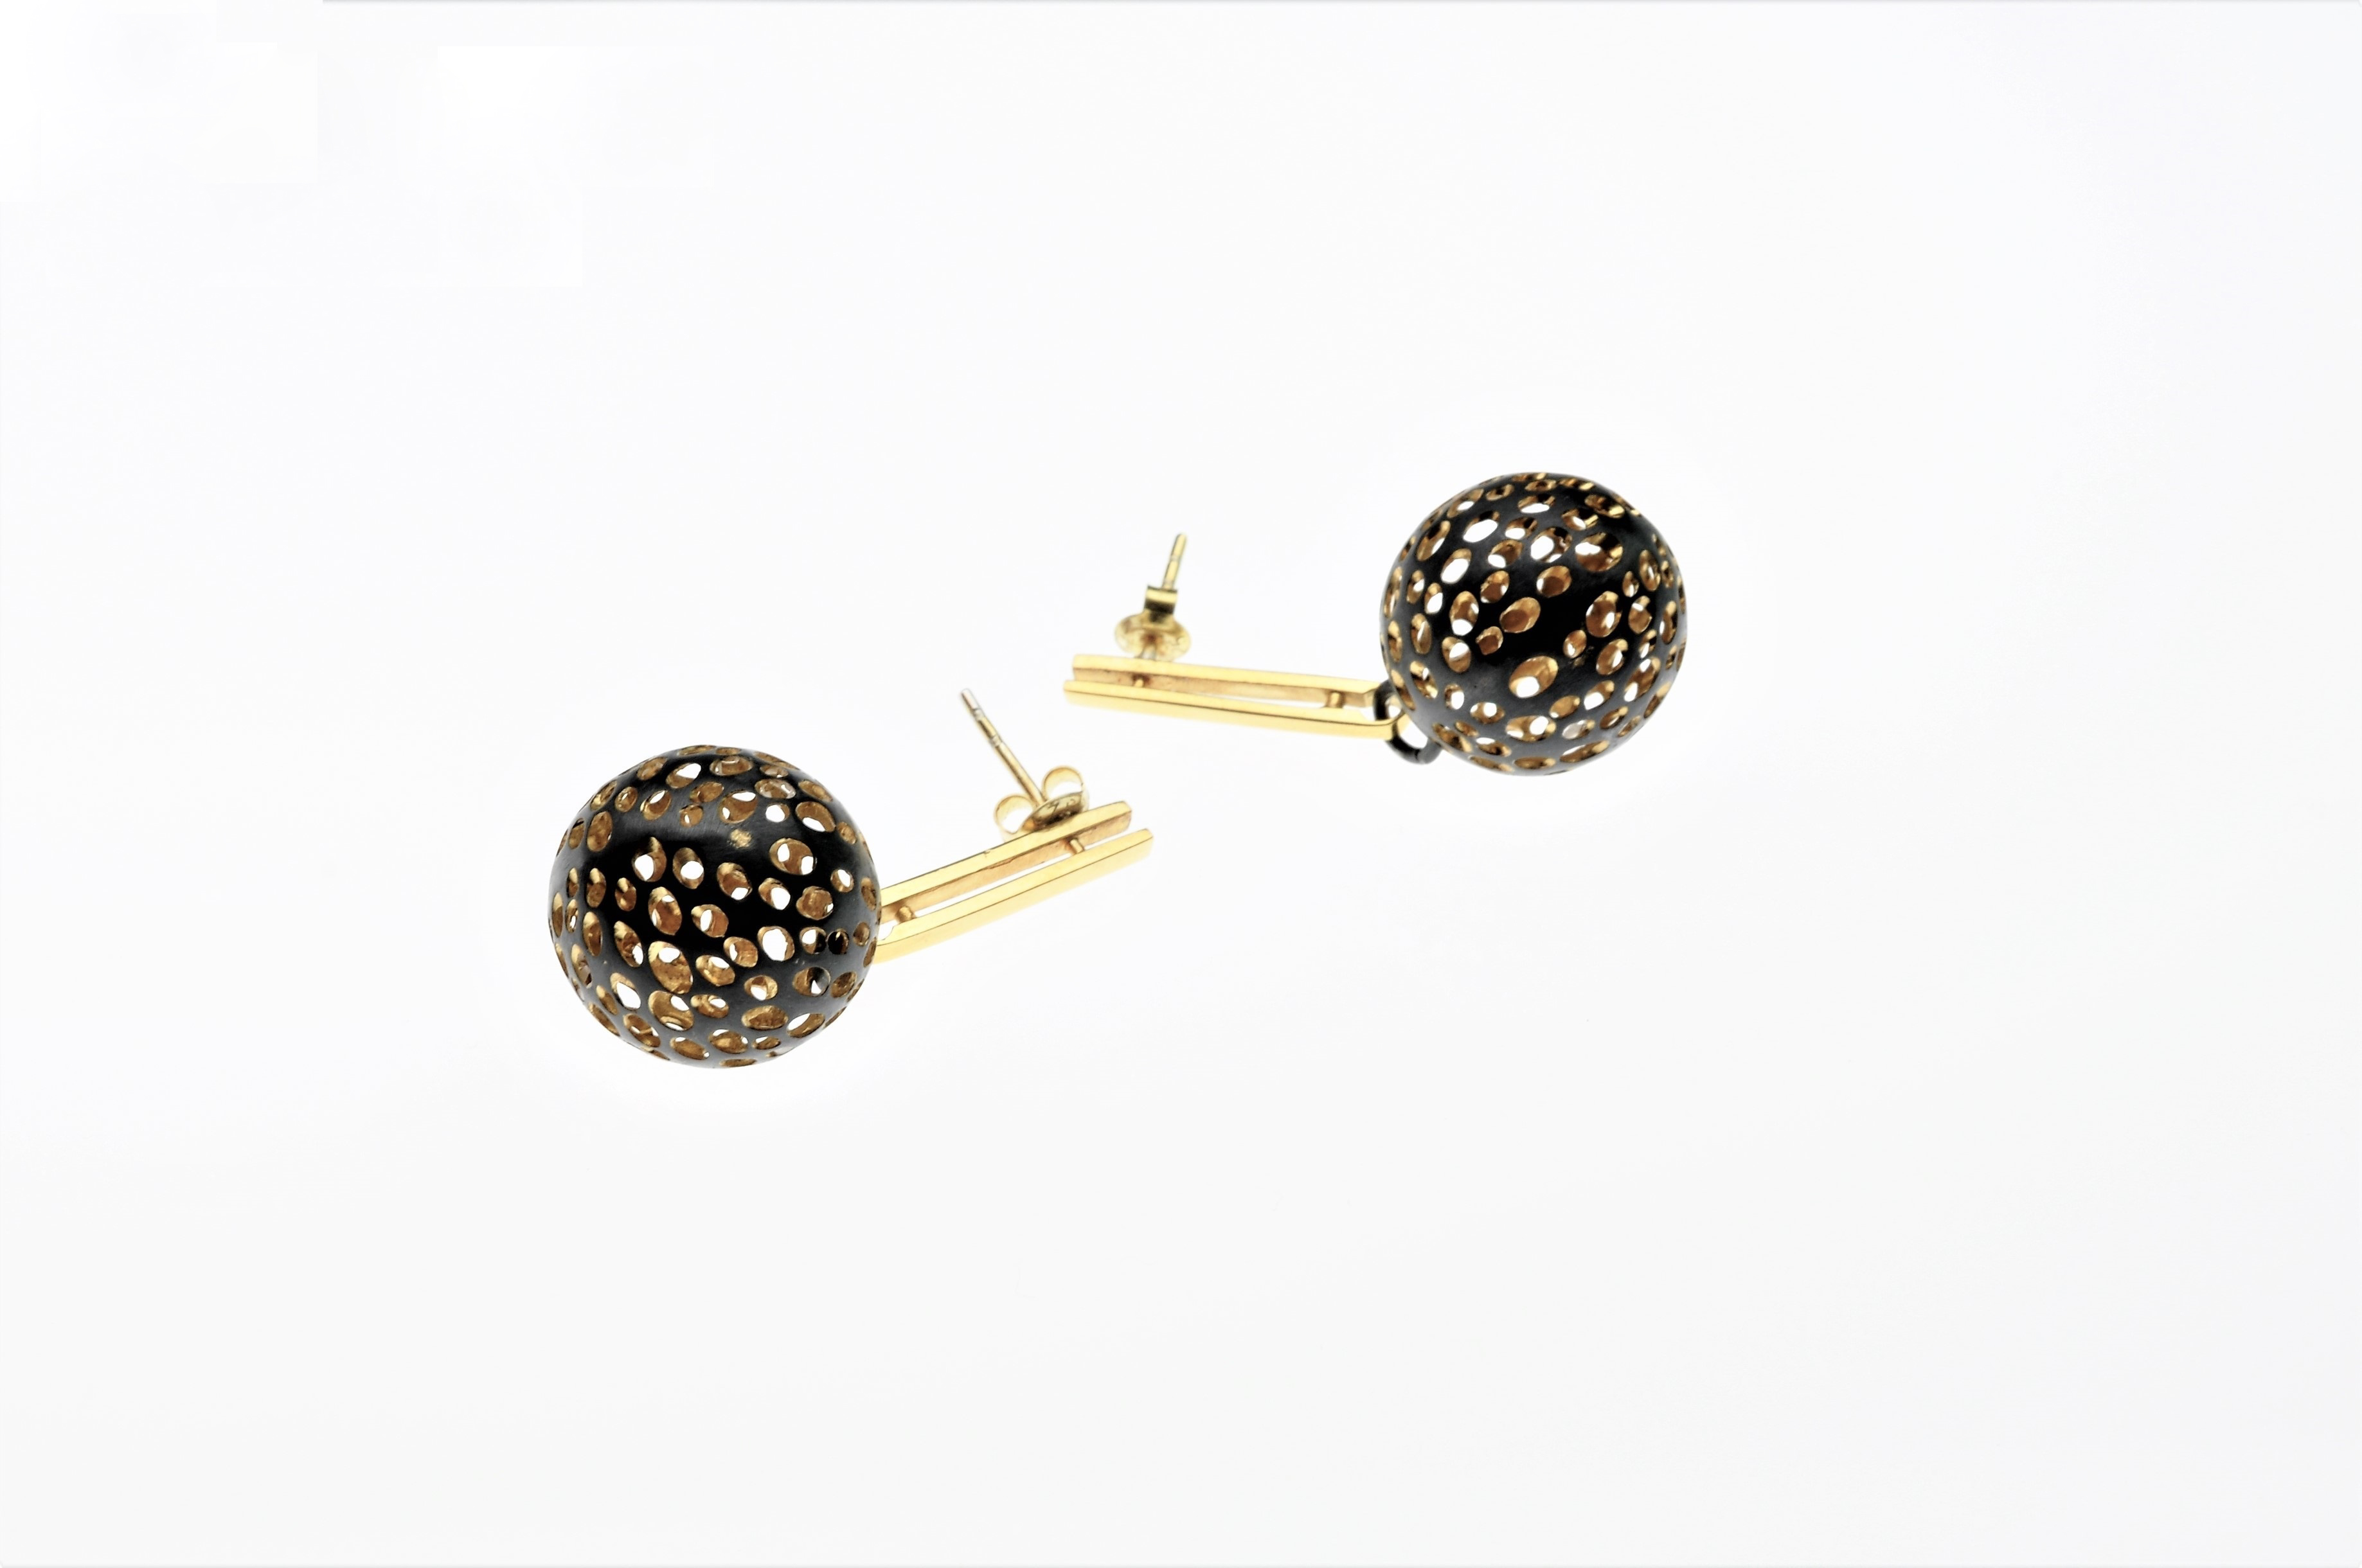 Posted Gold Vermeil Stem Earrings with Oxidized Sterling Silver Round Drop - BAS55dz-